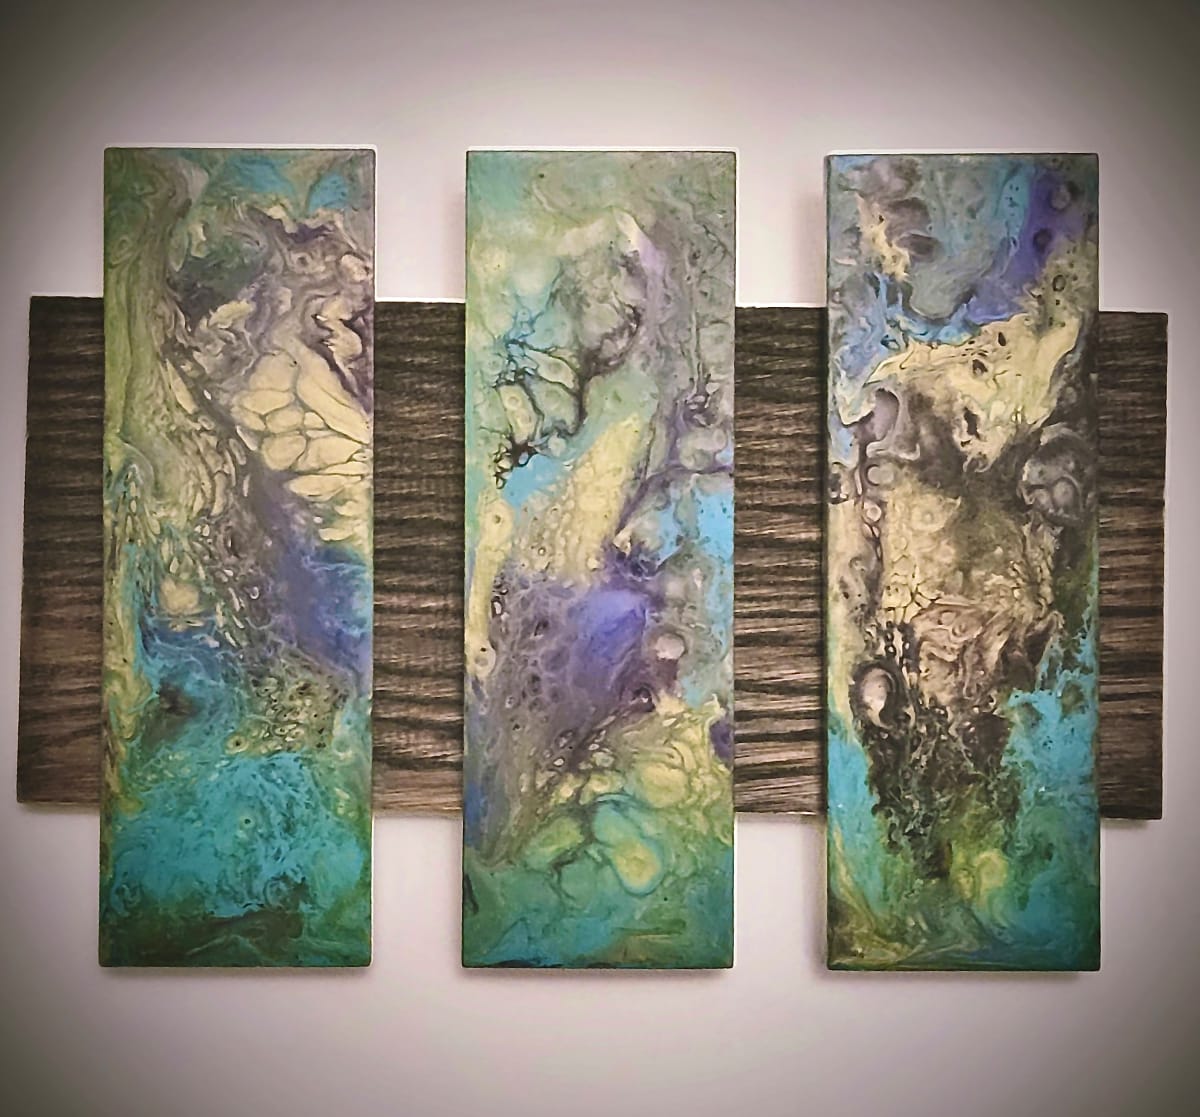 Altarpiece: Lush by Linda joy Weinstein  Image: Lush - a three panel altarpiece.  Acrylic on glass tiles mounted on flamed oak.